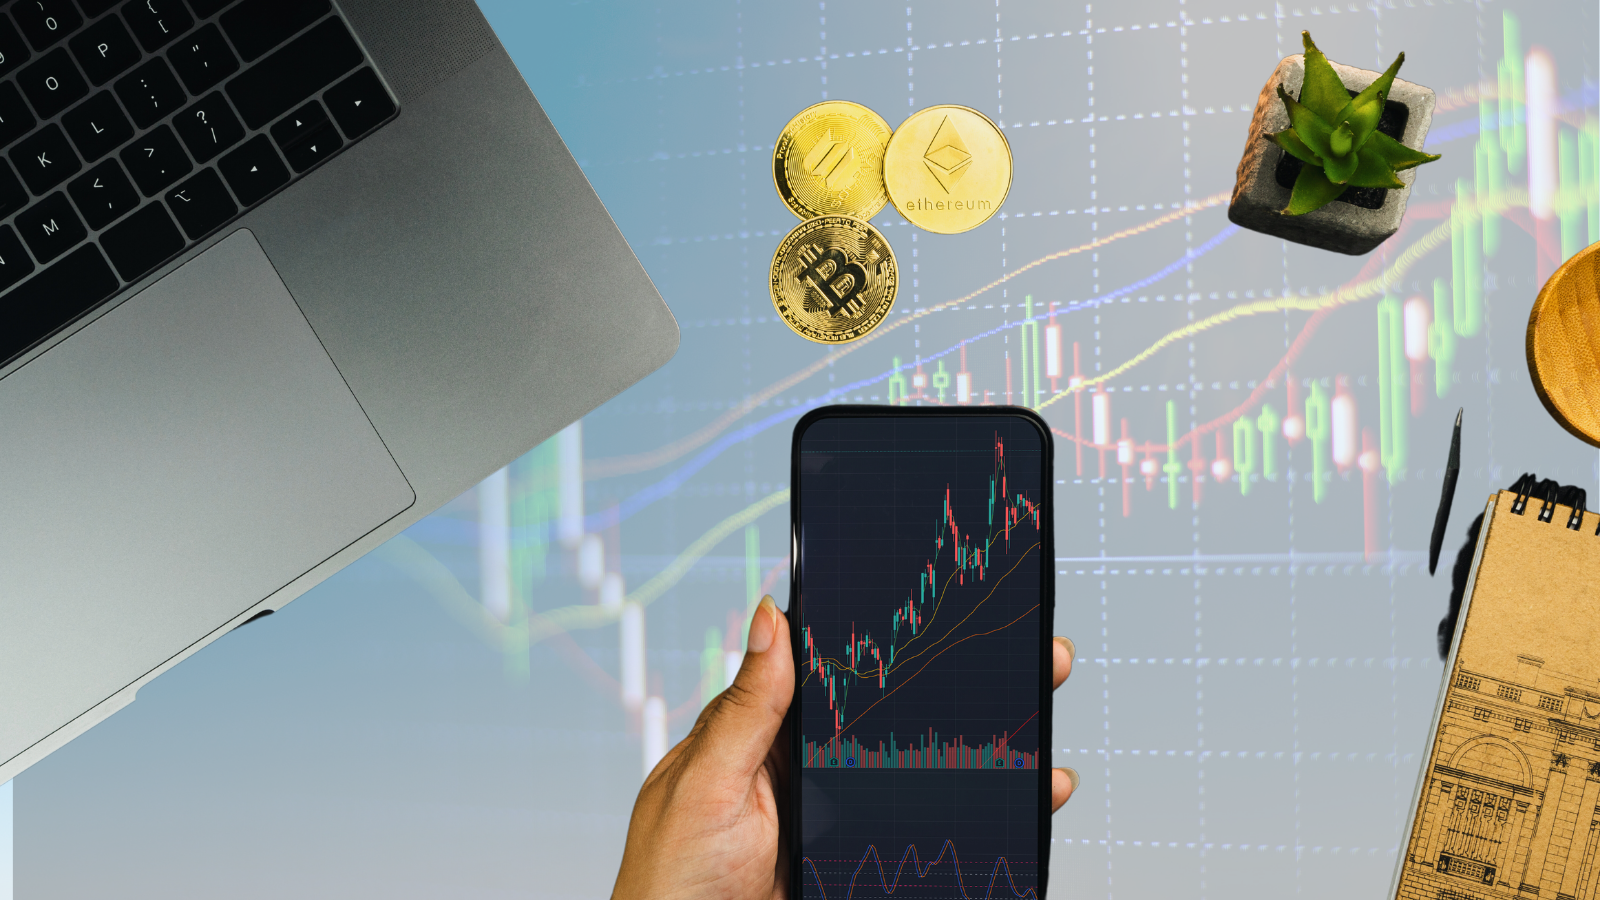 Master the Art of Crypto Trading with the Best Crypto Trading Course in Dubai